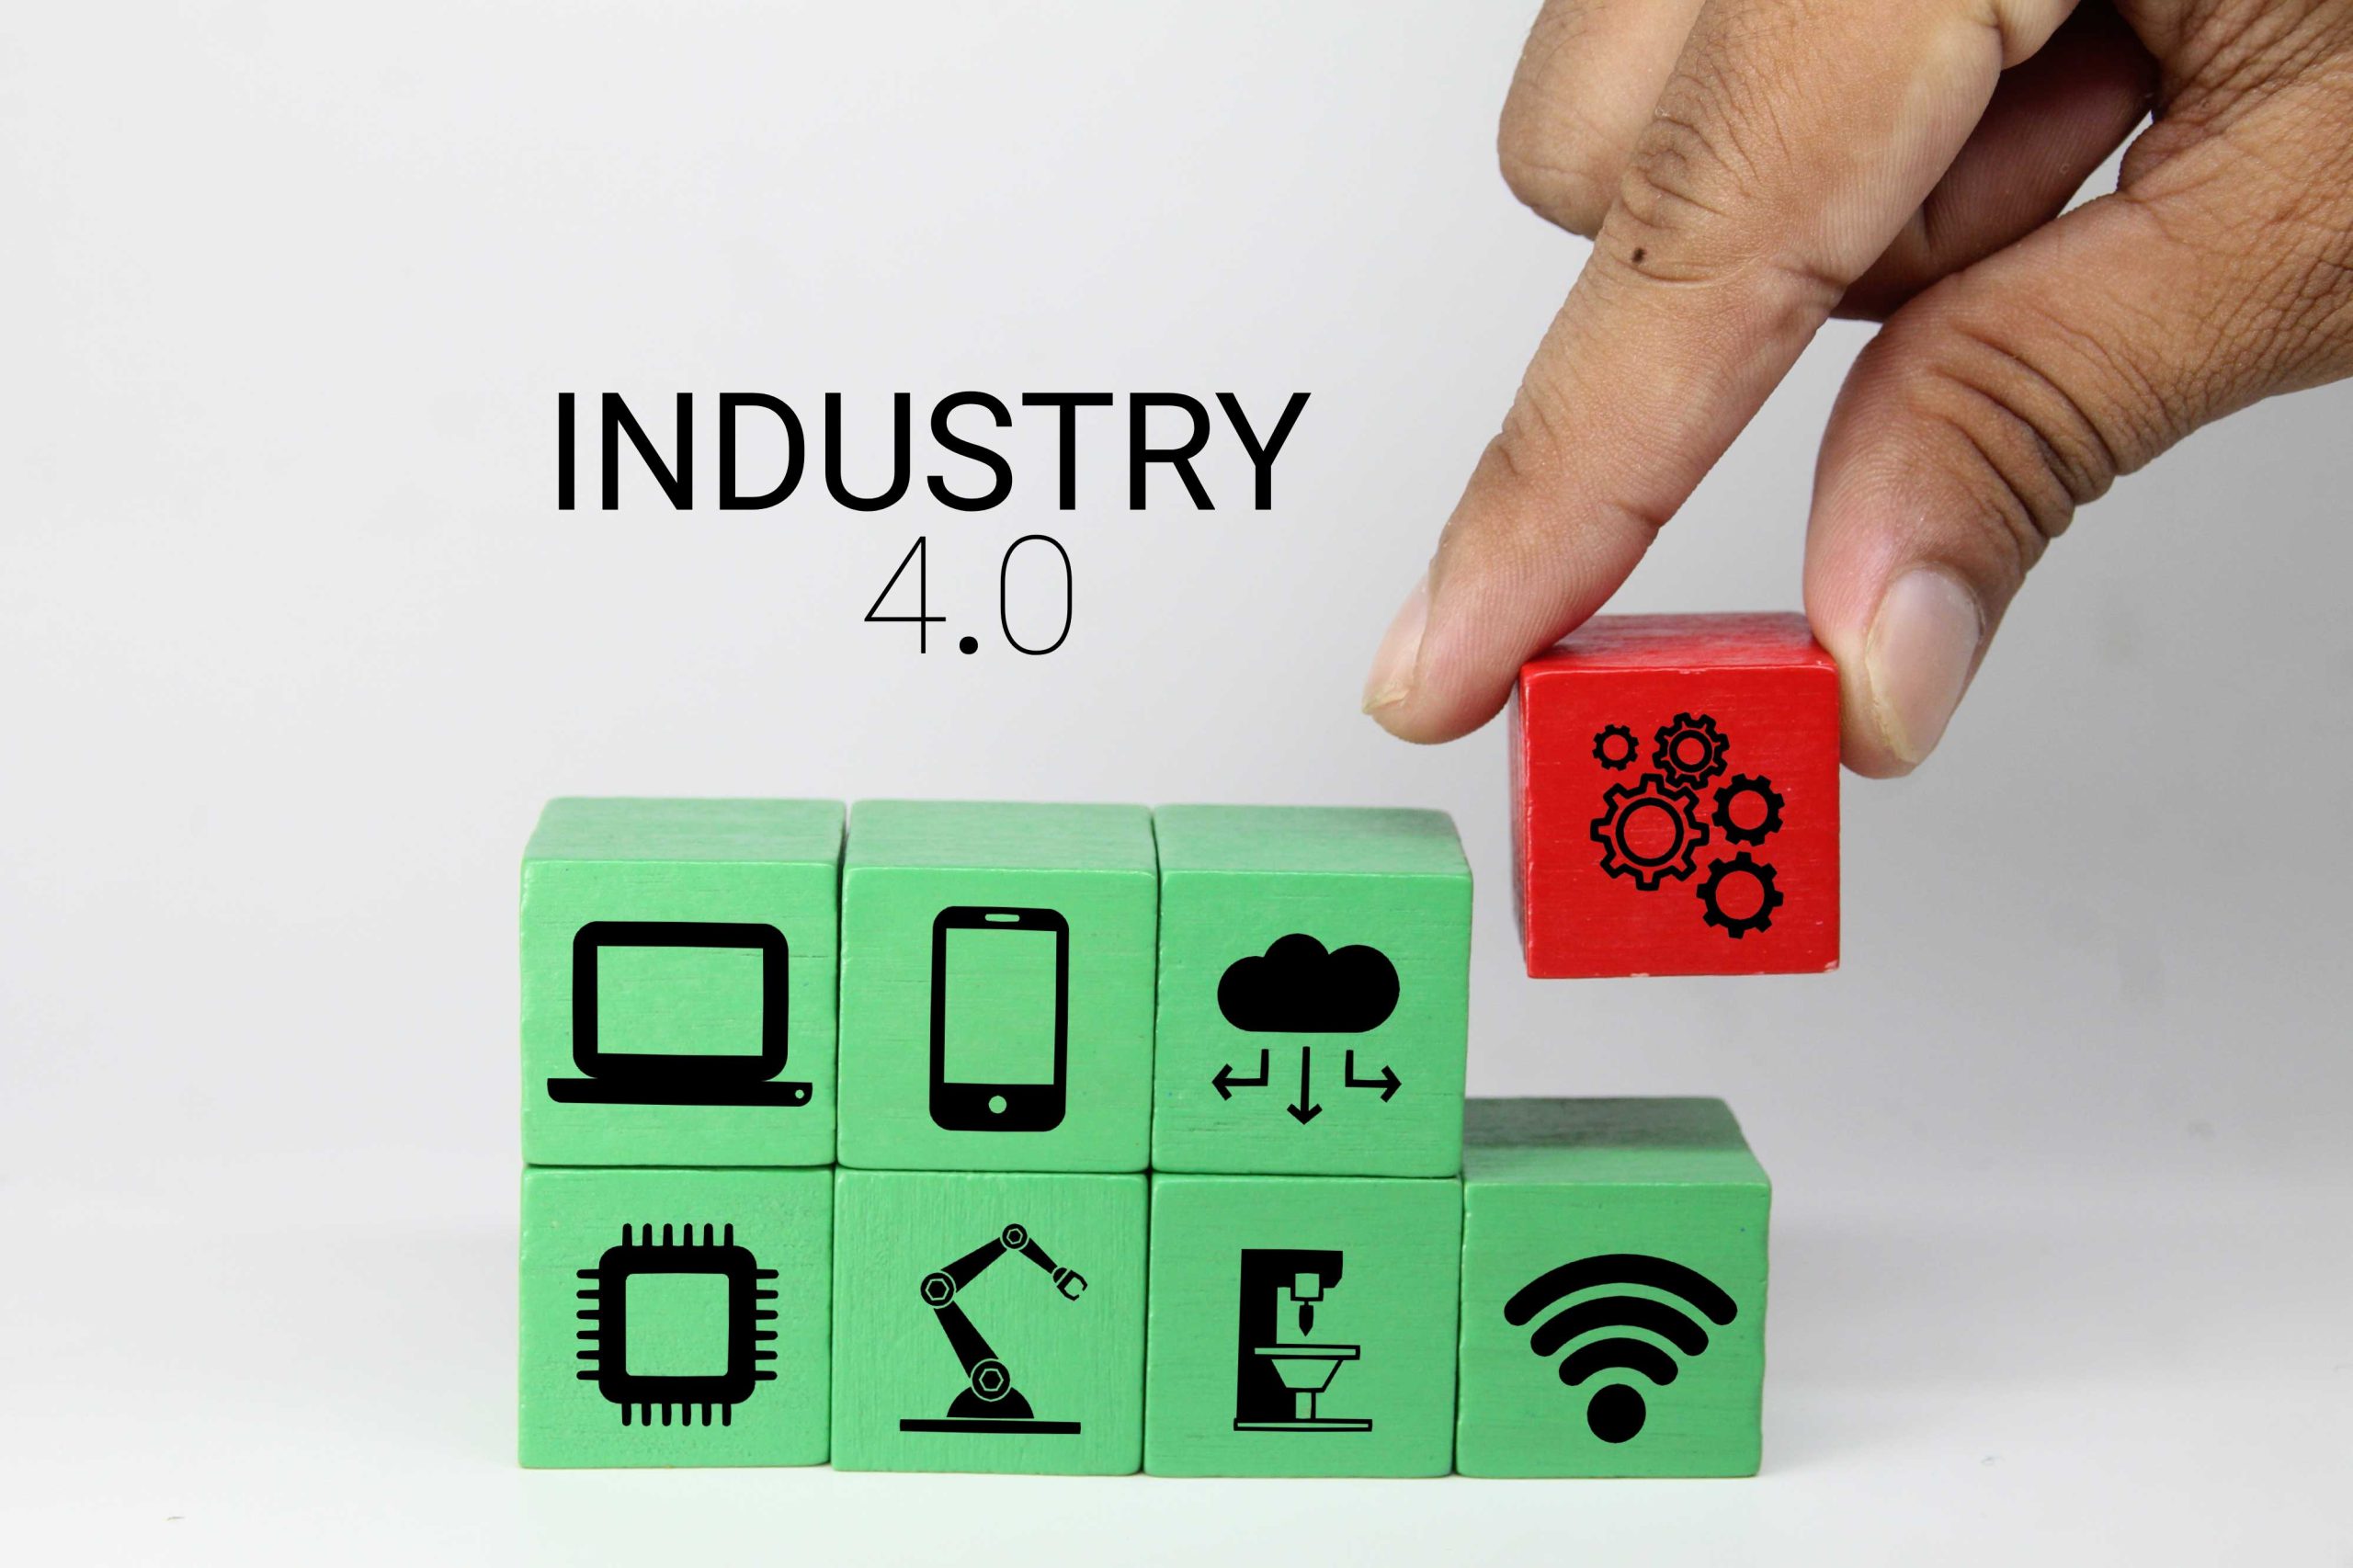 Digital Disruption in the Services sector with Industry 4.0